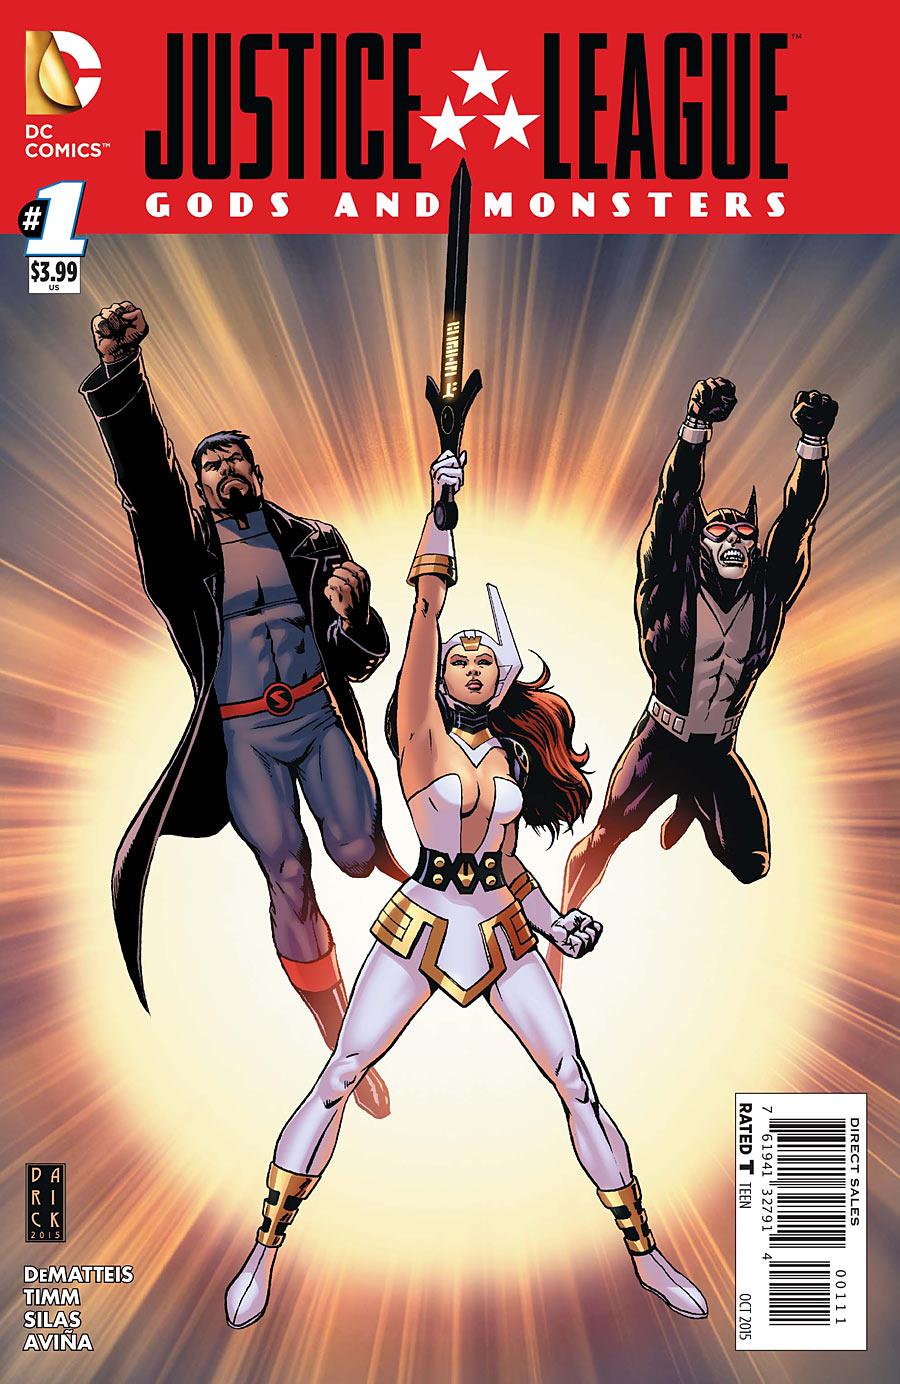 Justice League: Gods and Monsters Vol. 1 #1